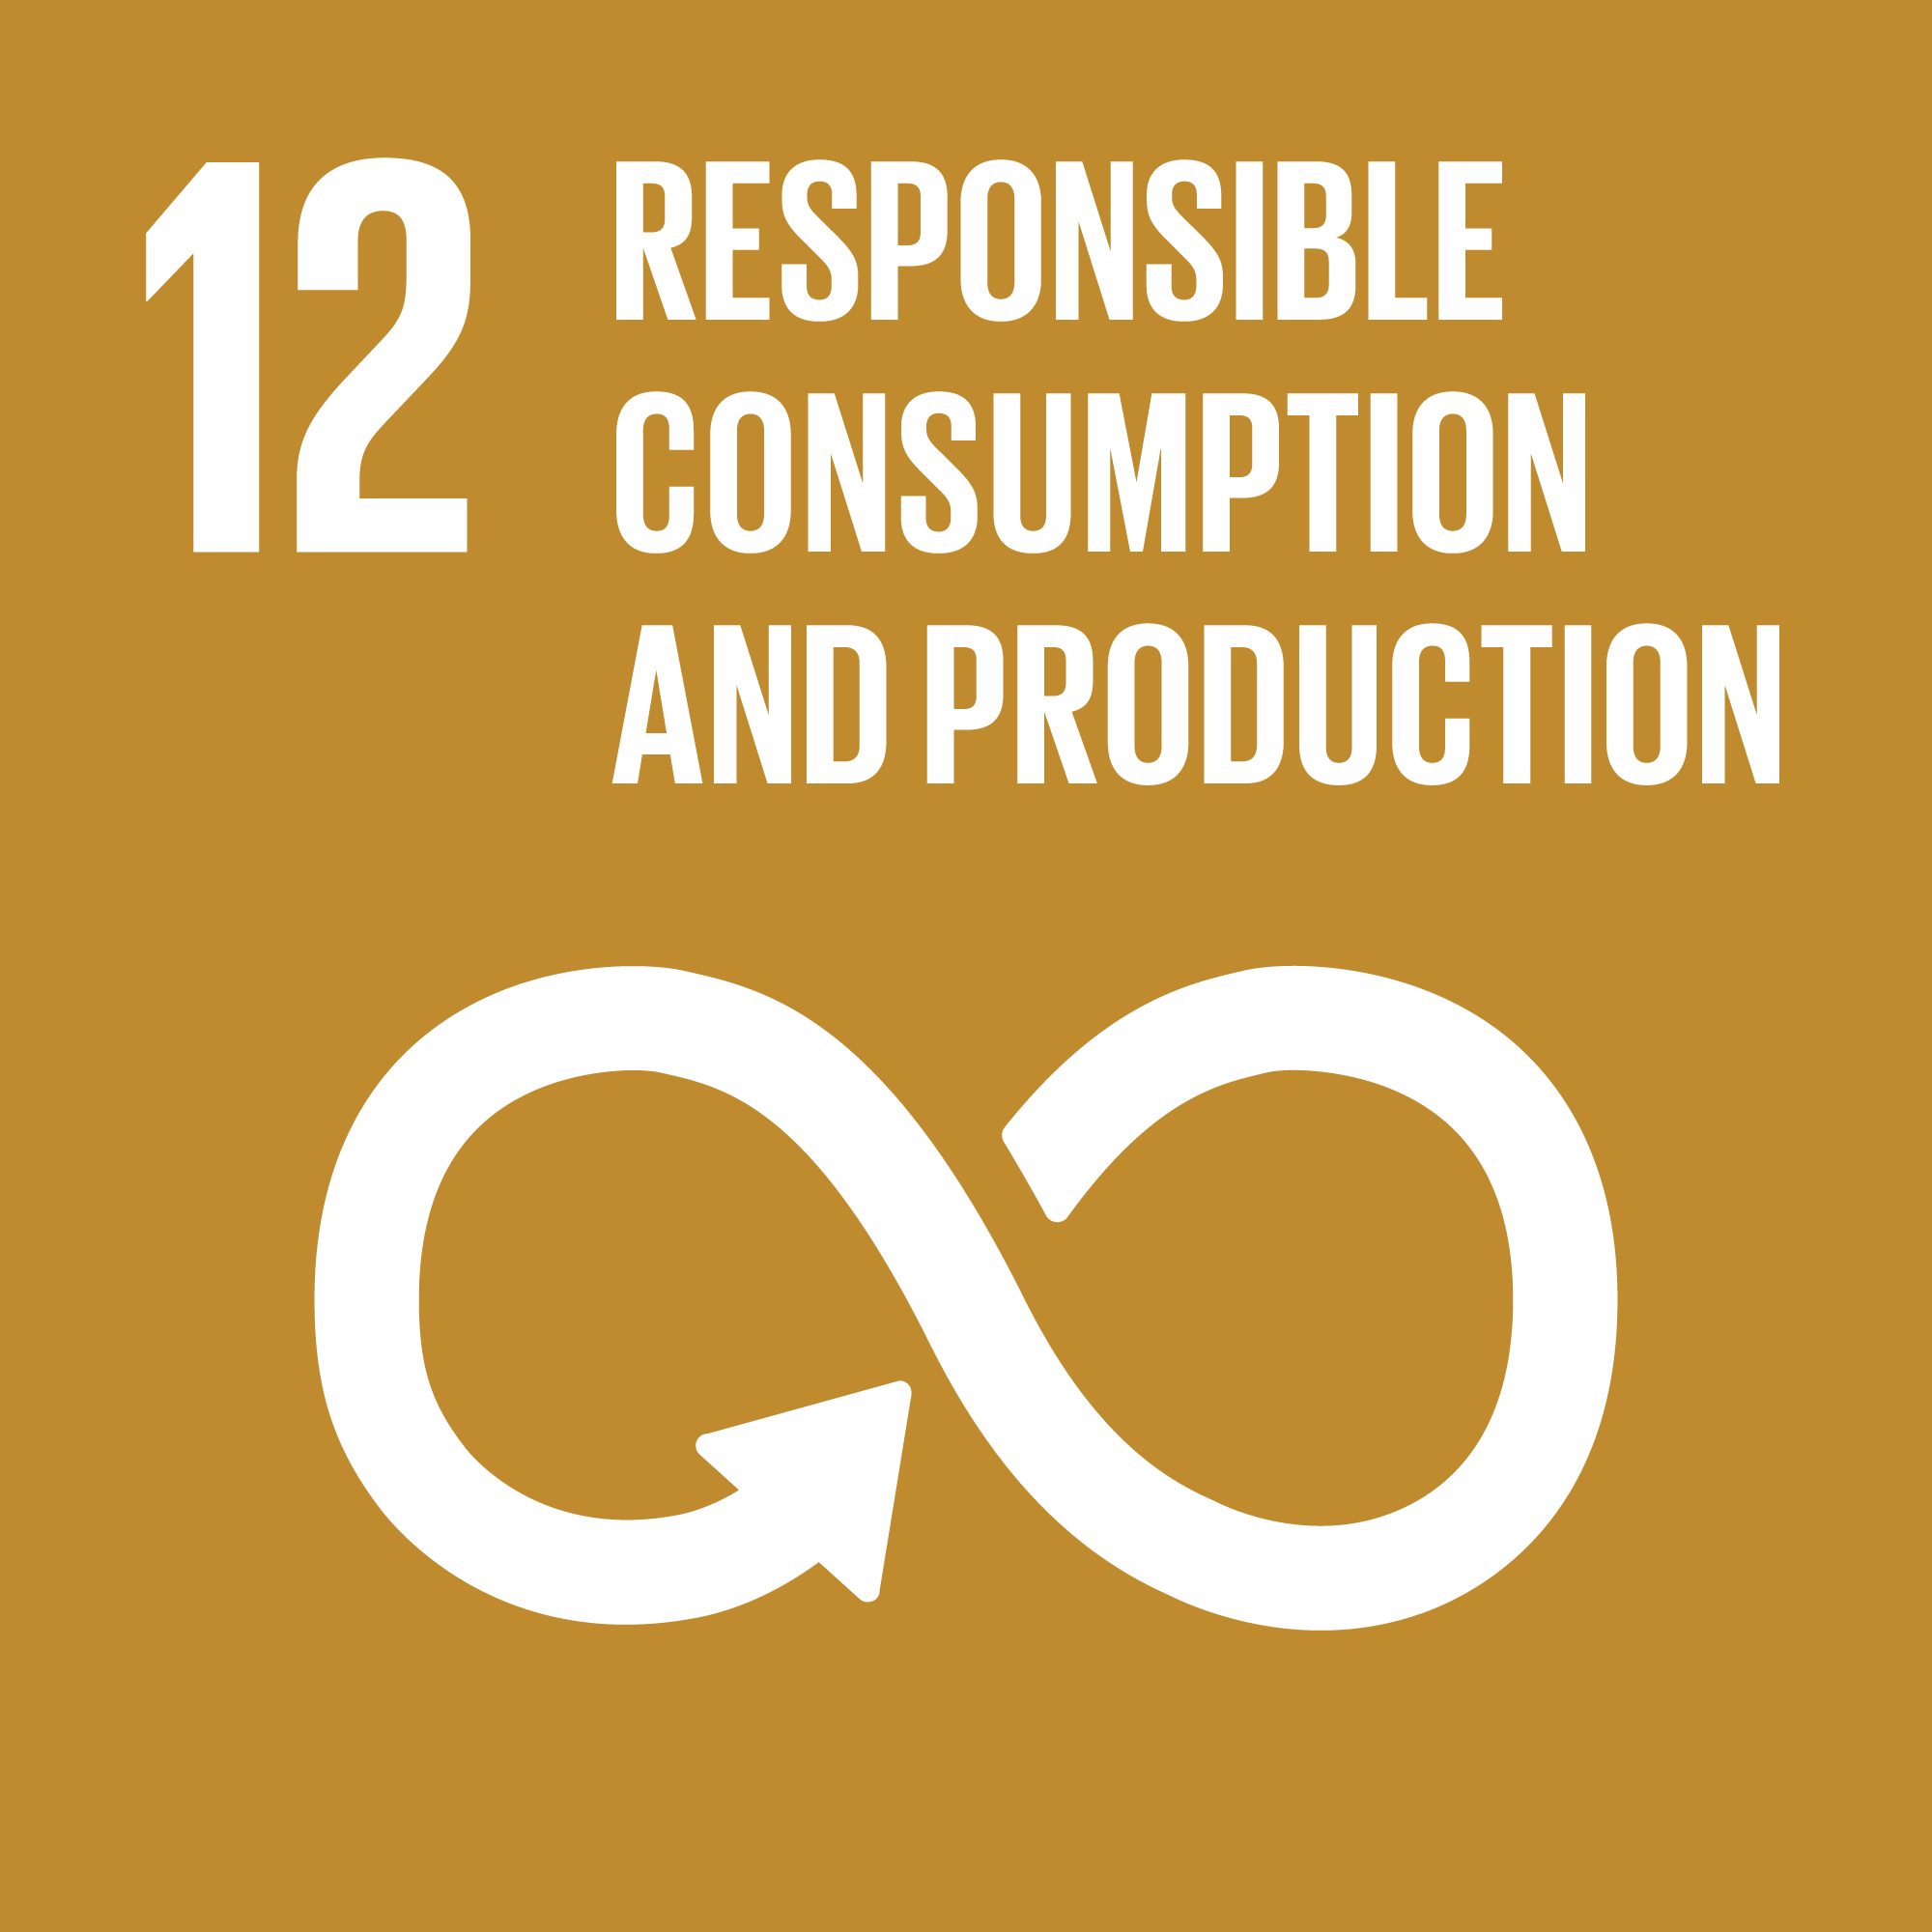 what is the meaning of responsible consumption and production